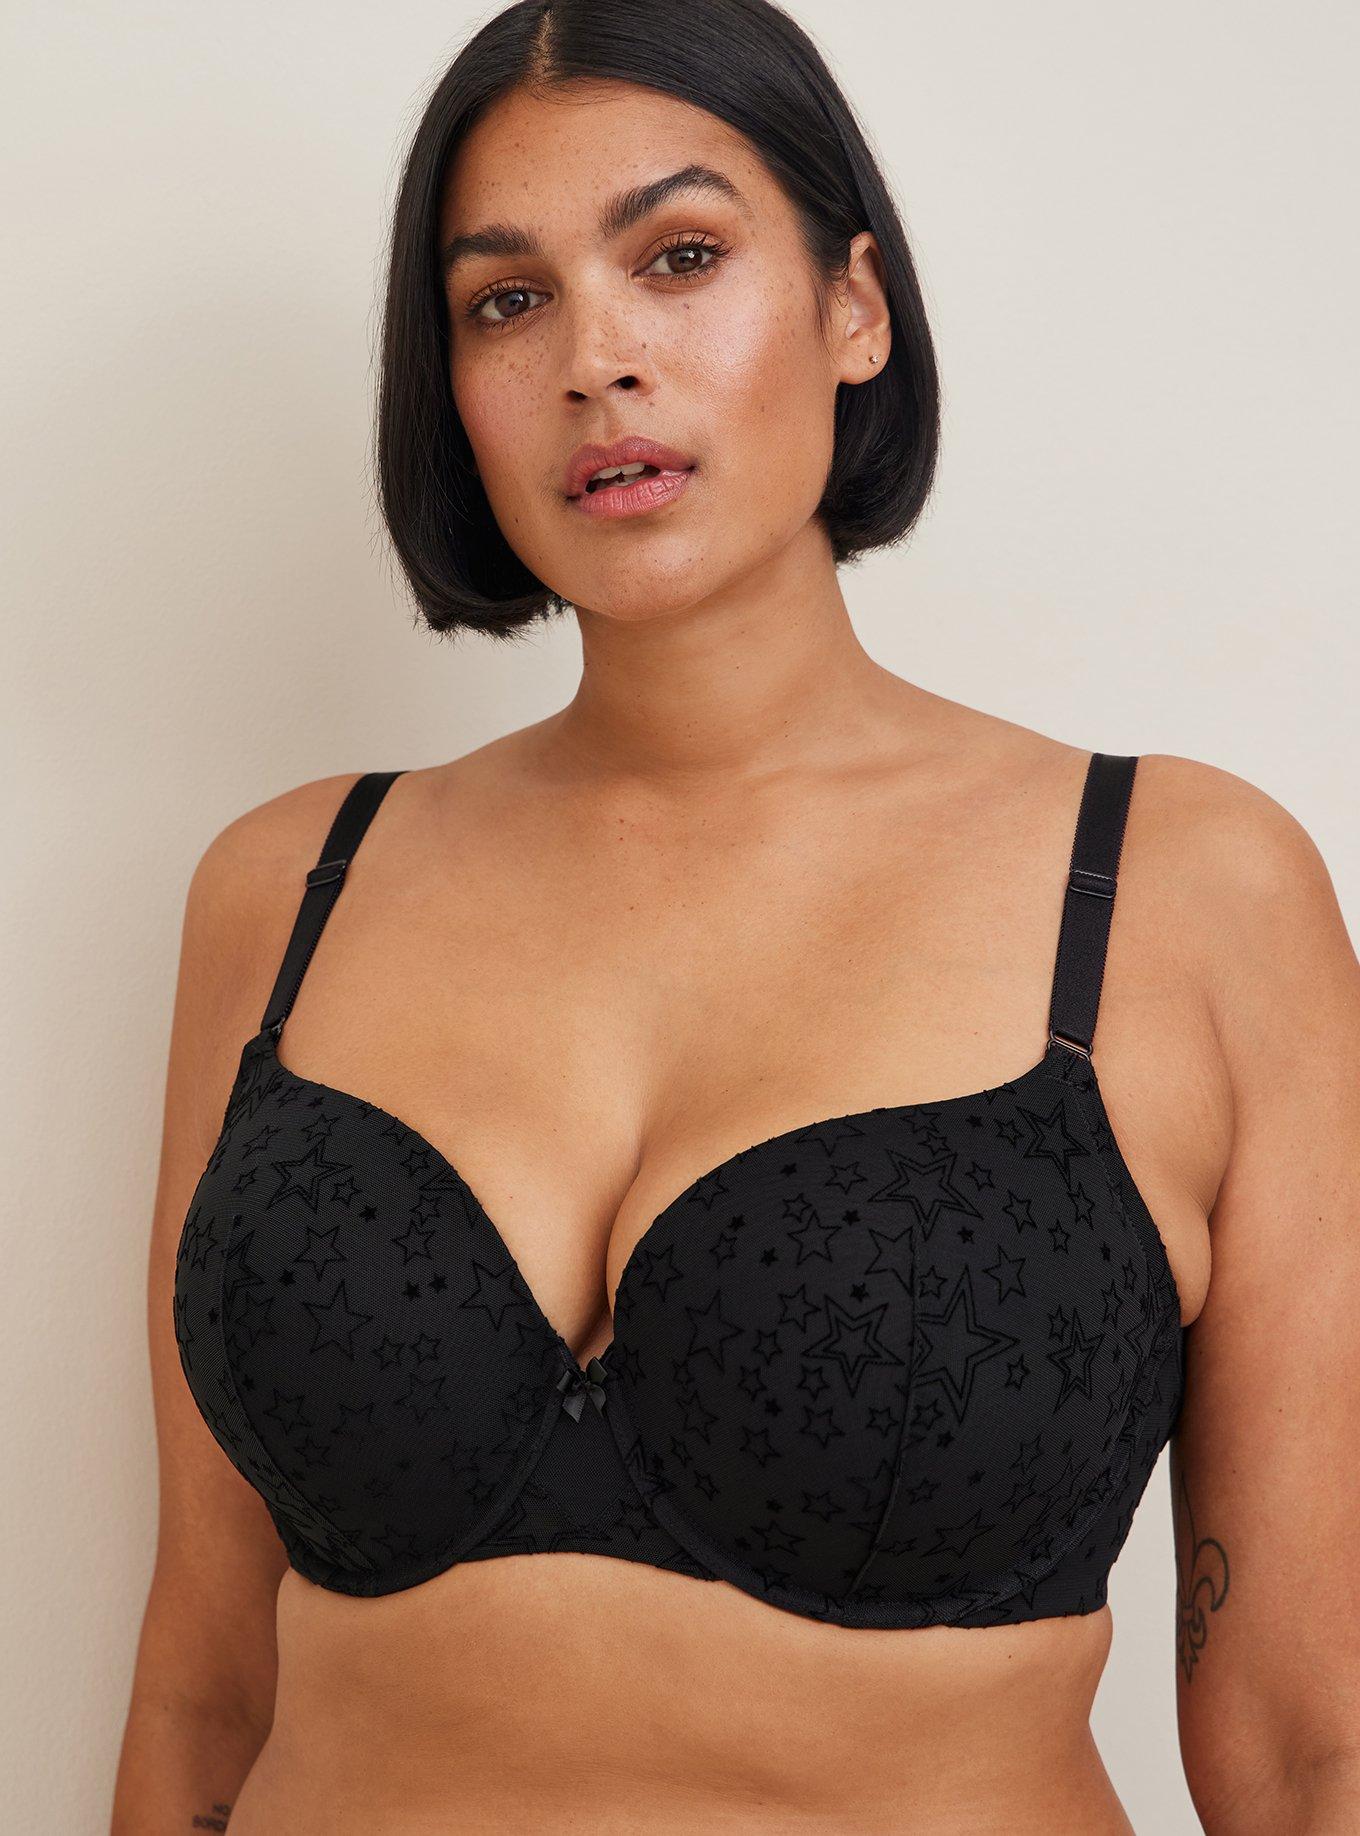 Bra Sister Sizes - Unlocking The #1 Secret to Your Perfect Fitting